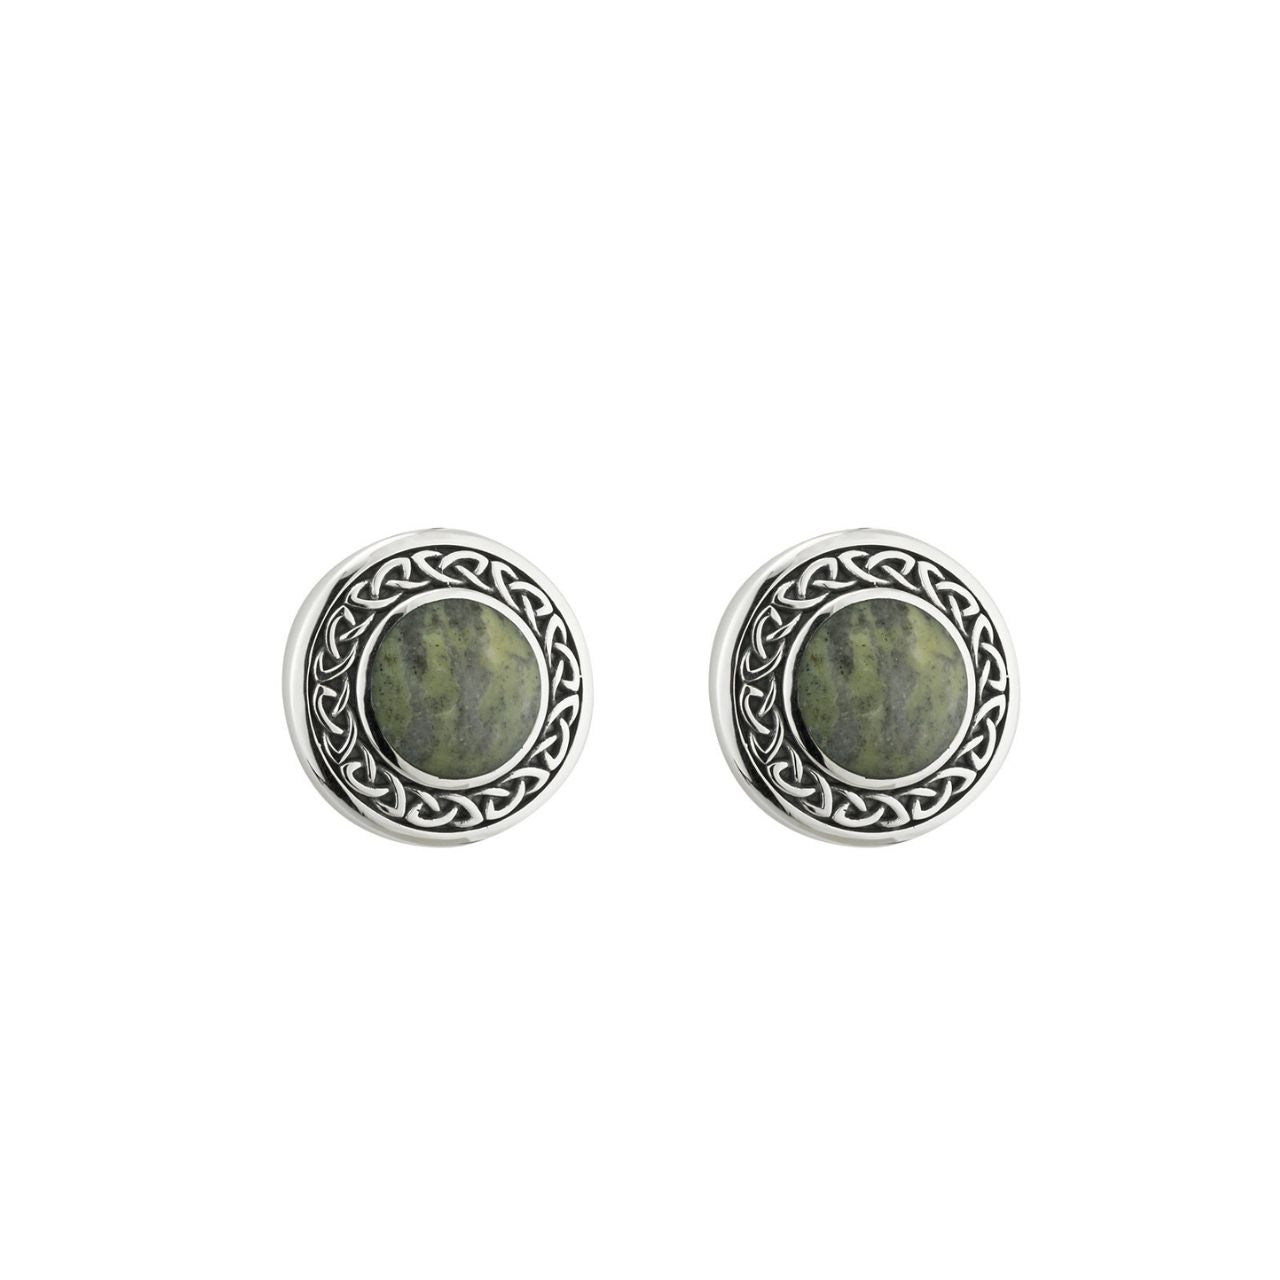 Sterling Silver Connemara Marble Round Celtic Stud Earrings  These striking sterling silver stud earrings are made from Connemara marble, a unique stone that dates back over 900 million years and is known as “Ireland’s gemstone”.